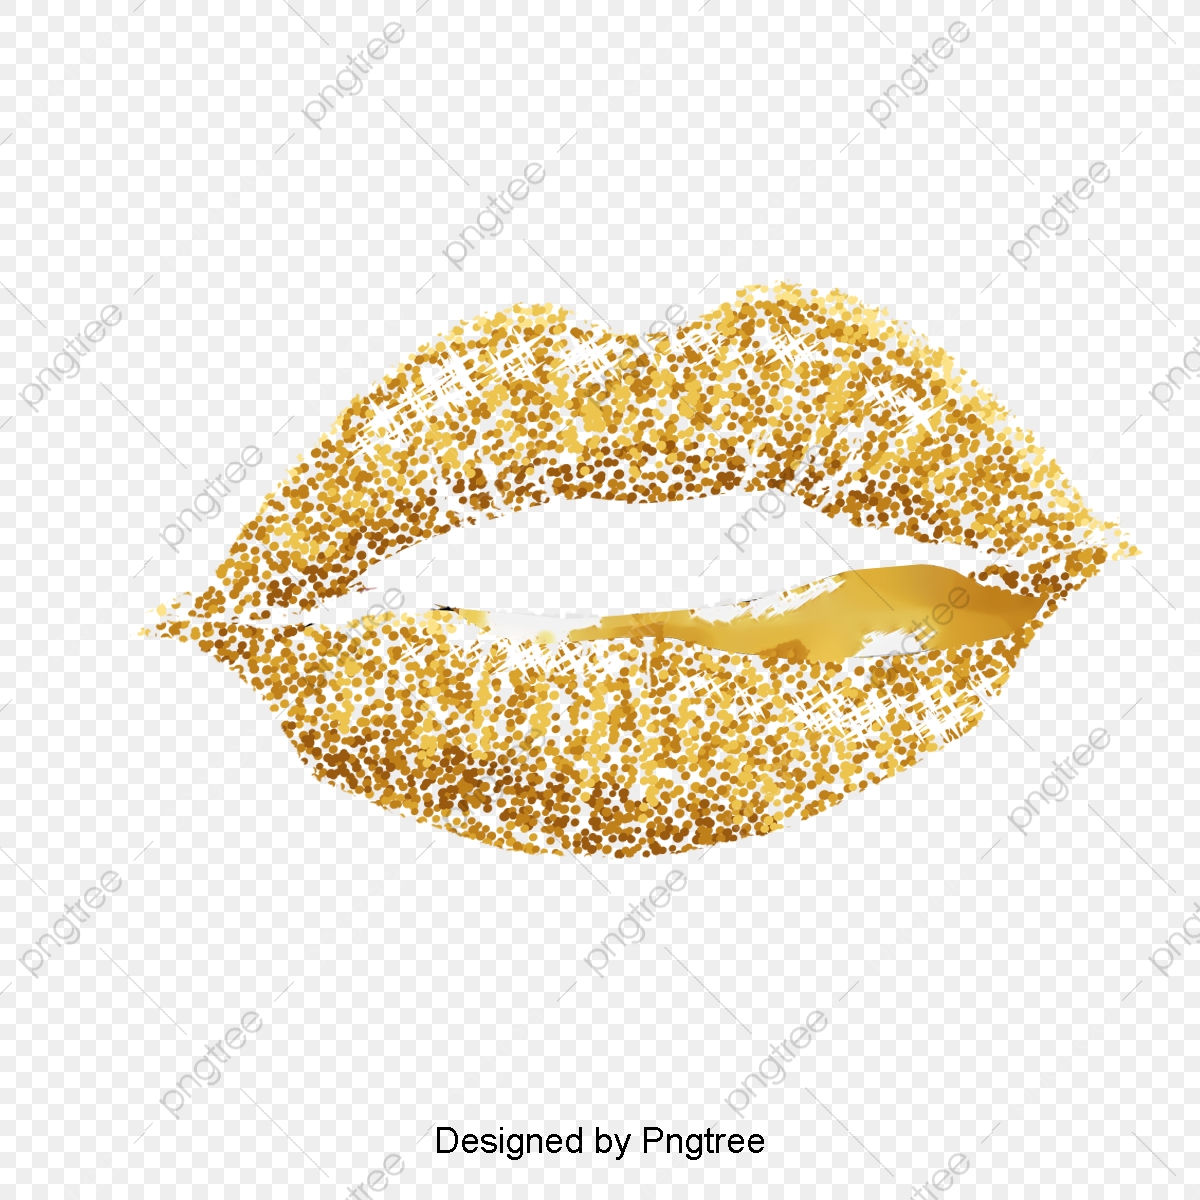 Gold Lips Vector Image, Golden, Lips, Vector Image PNG Transparent.